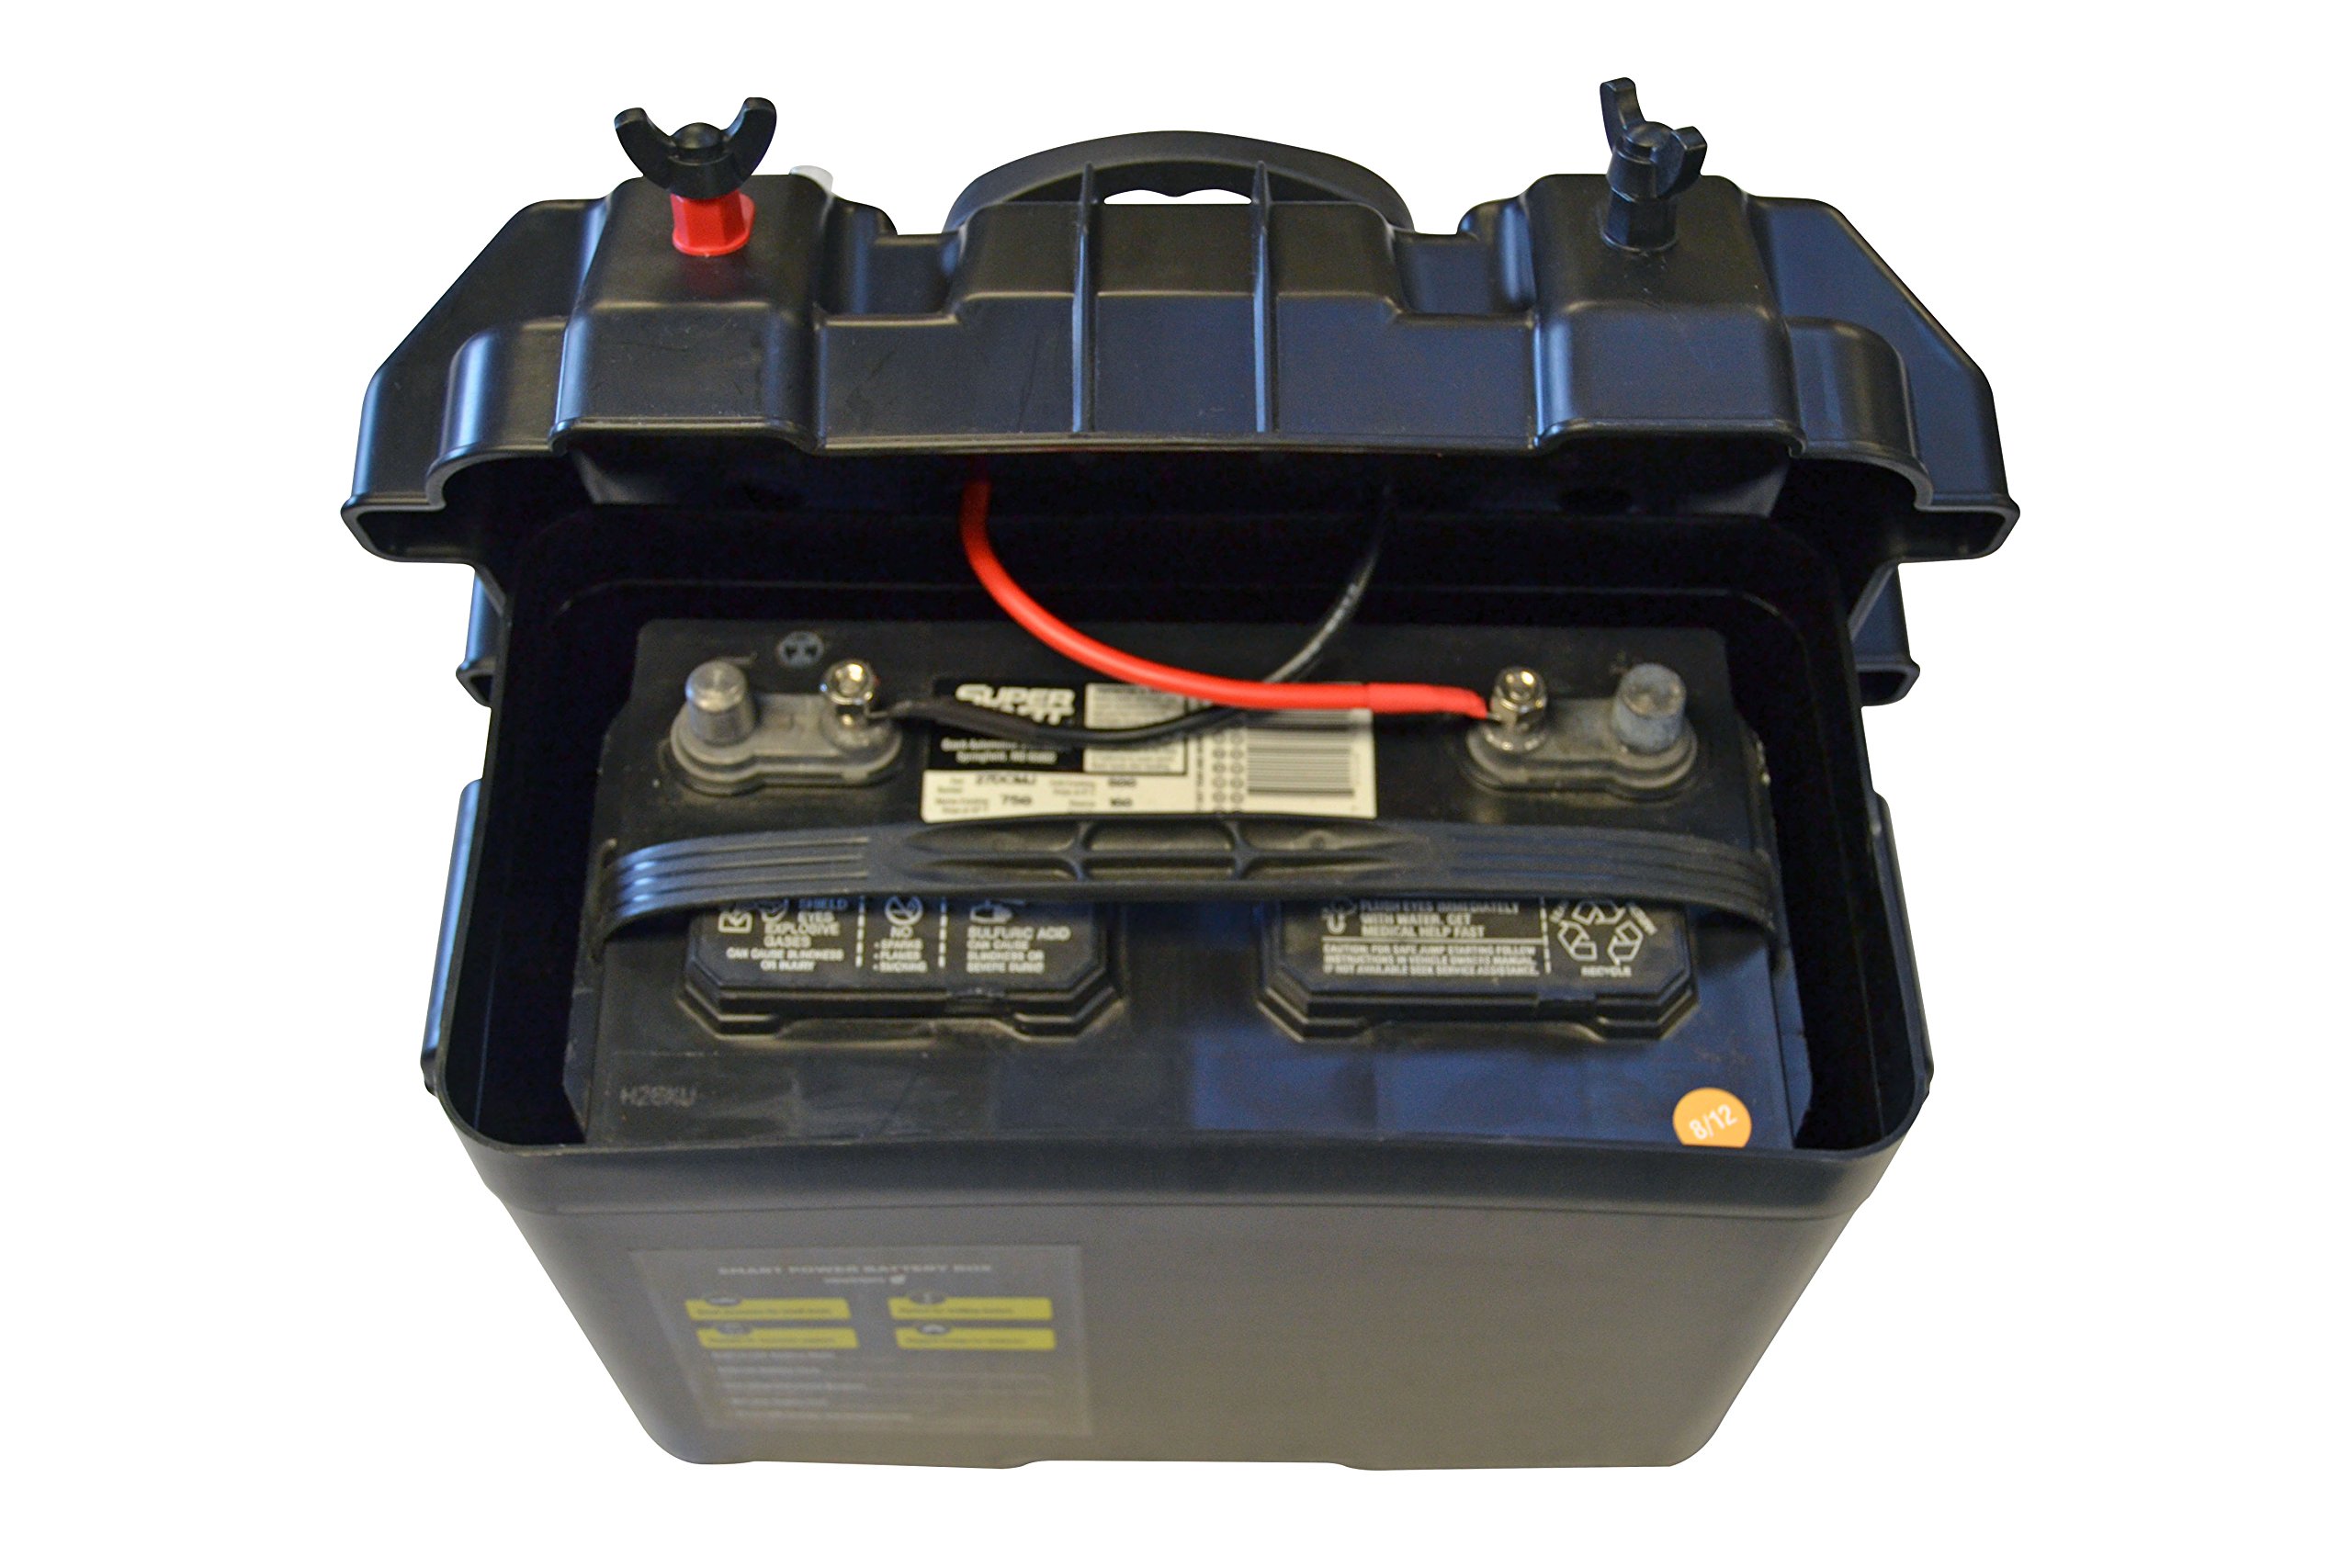 Newport Trolling Motor Smart Battery Box Power Center with USB and DC Ports